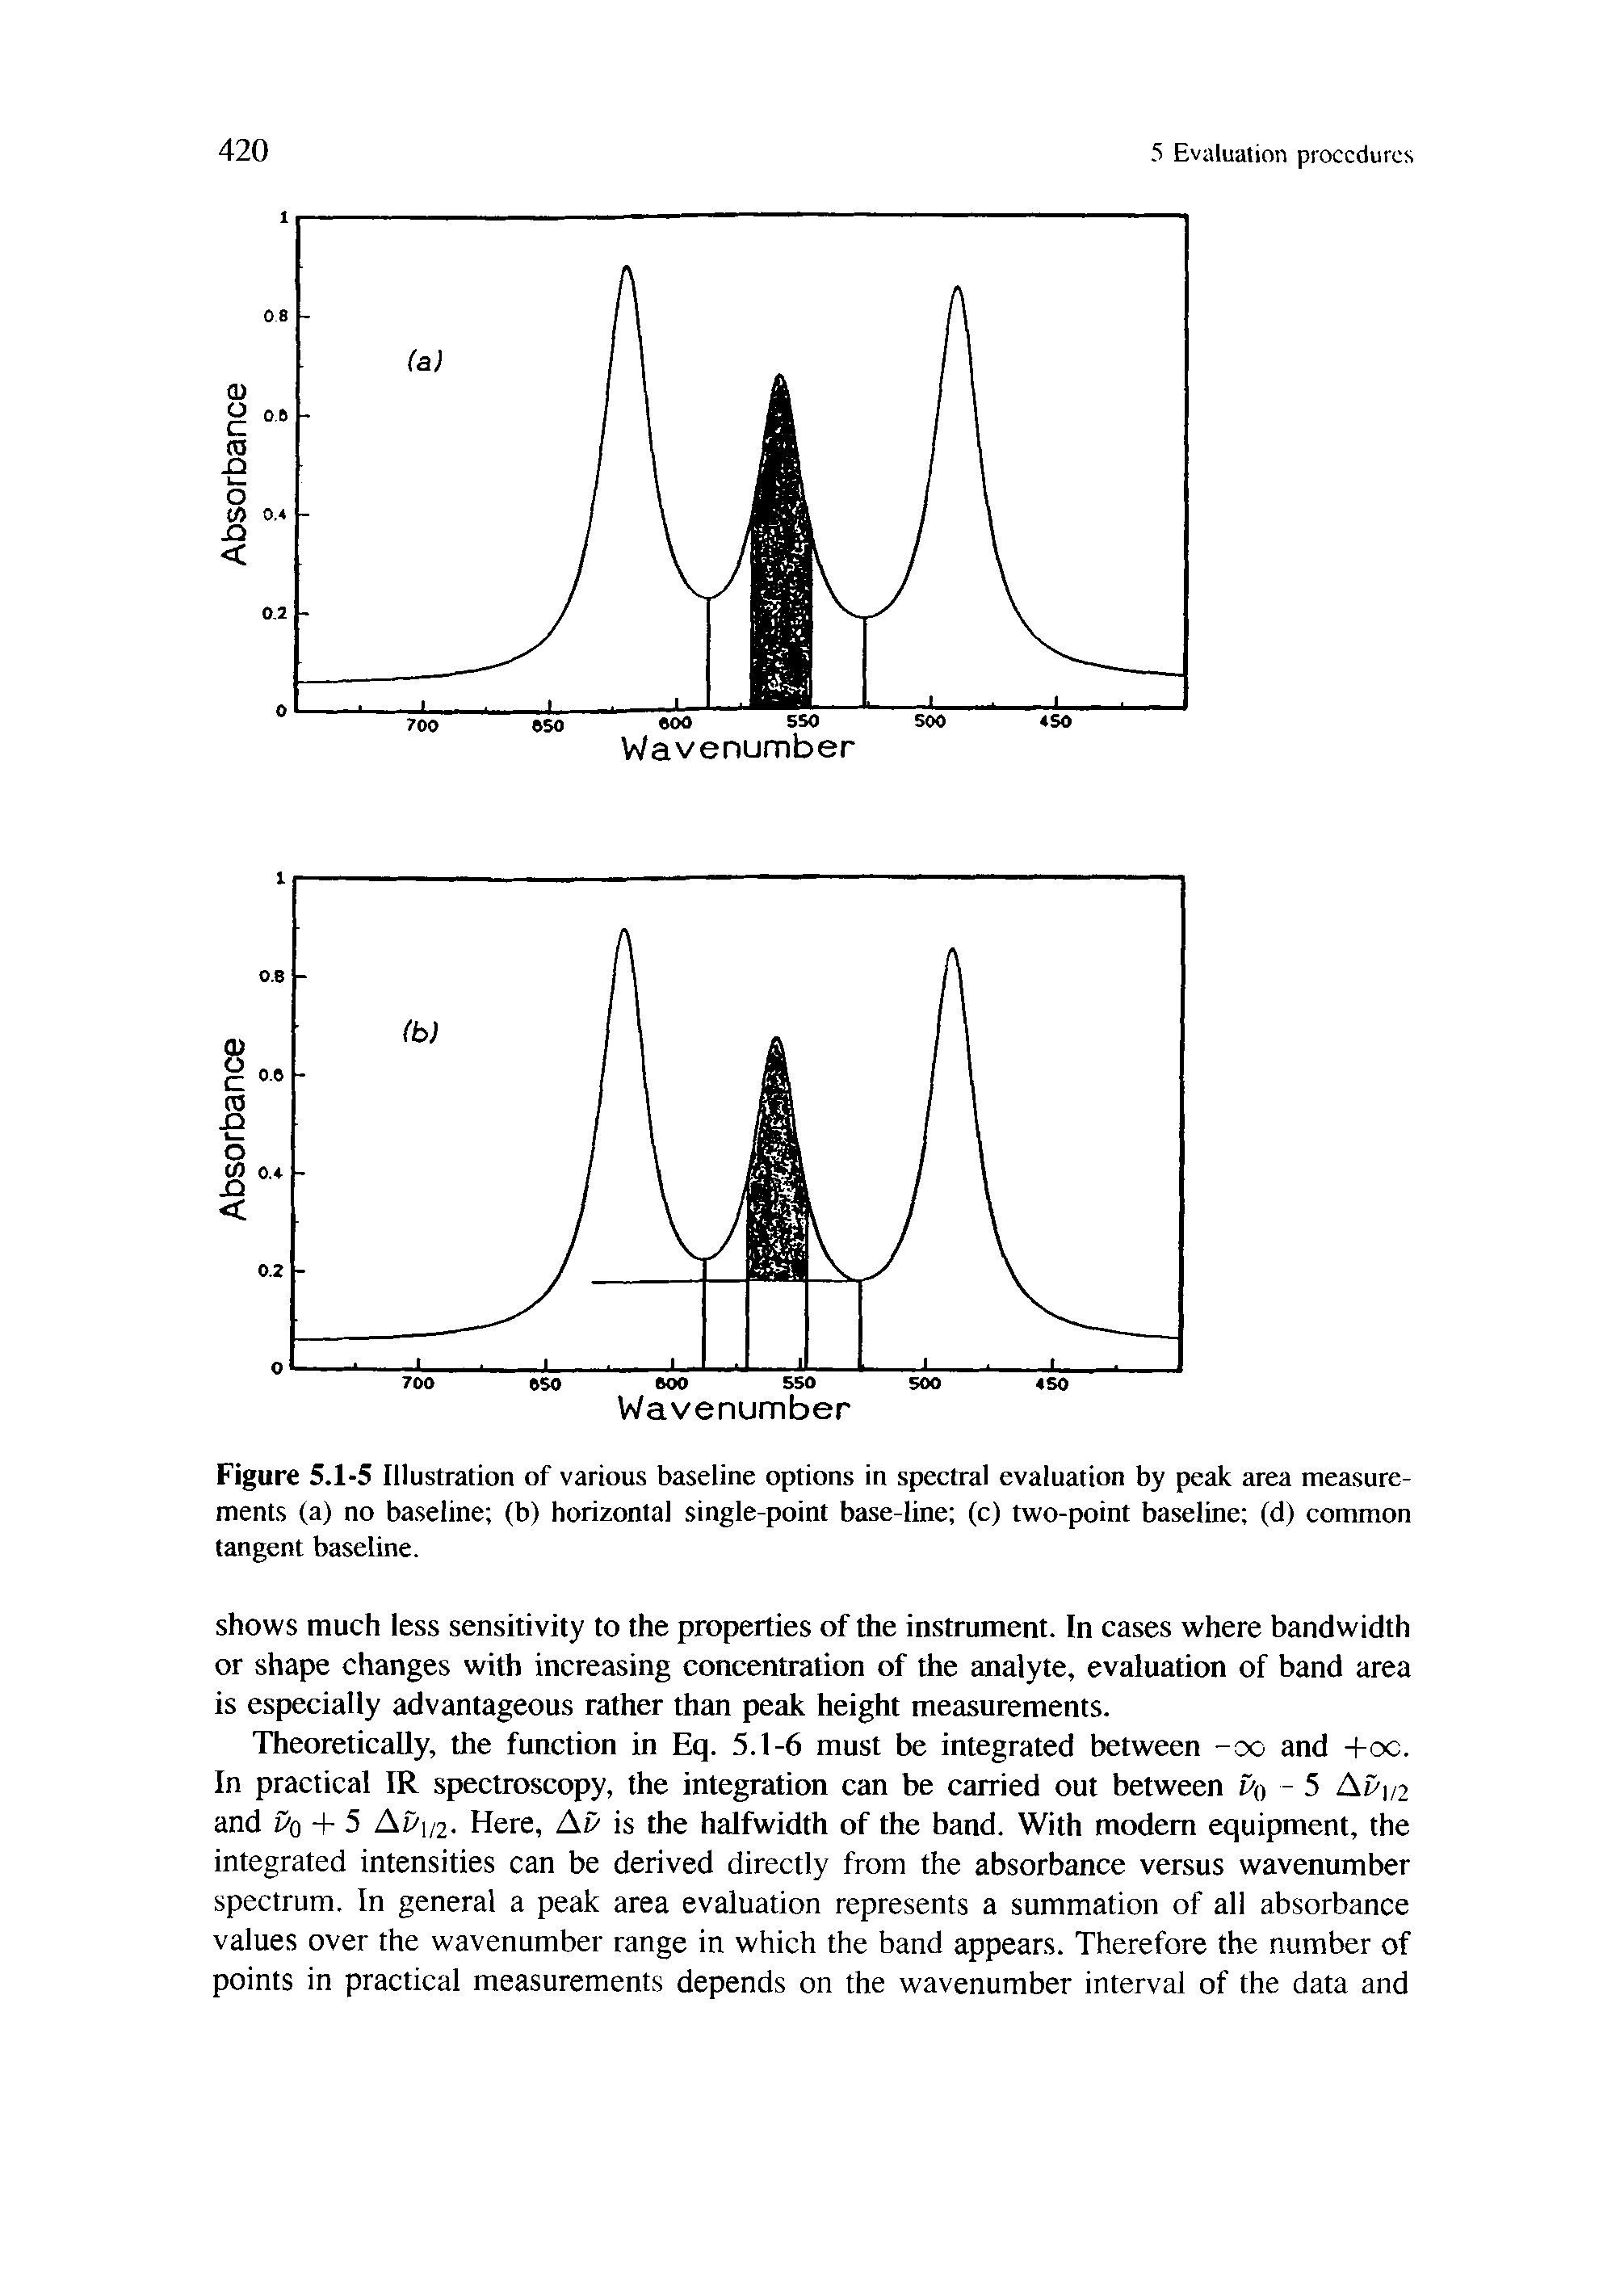 Figure 5.1-5 Illustration of various baseline options in spectral evaluation by peak area measurements (a) no baseline (b) horizontal single-point base-line (c) two-point baseline (d) common tangent baseline.